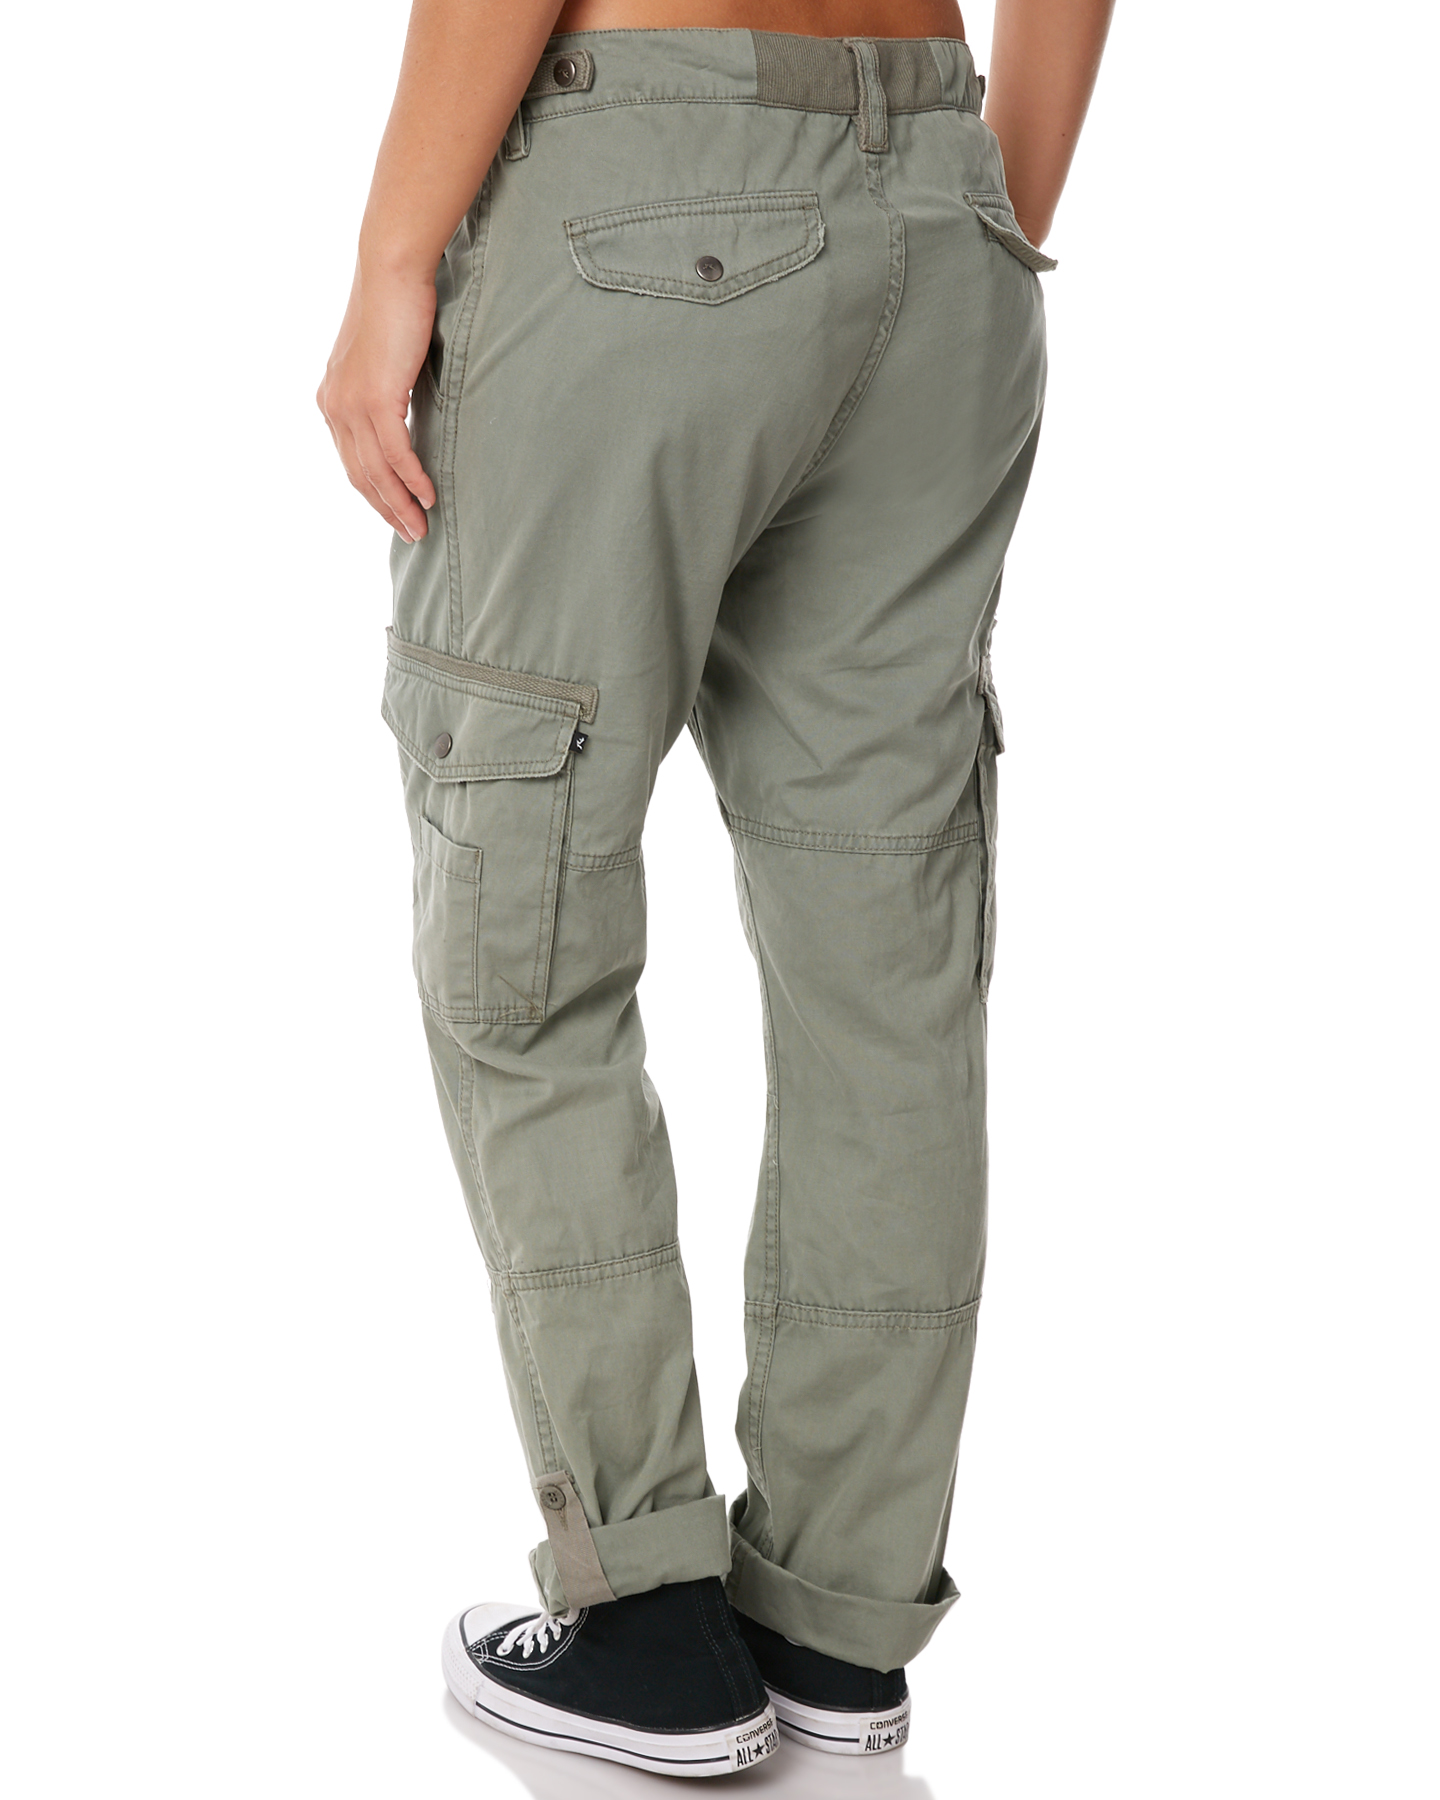 Rusty Cadet Pant - Army | SurfStitch